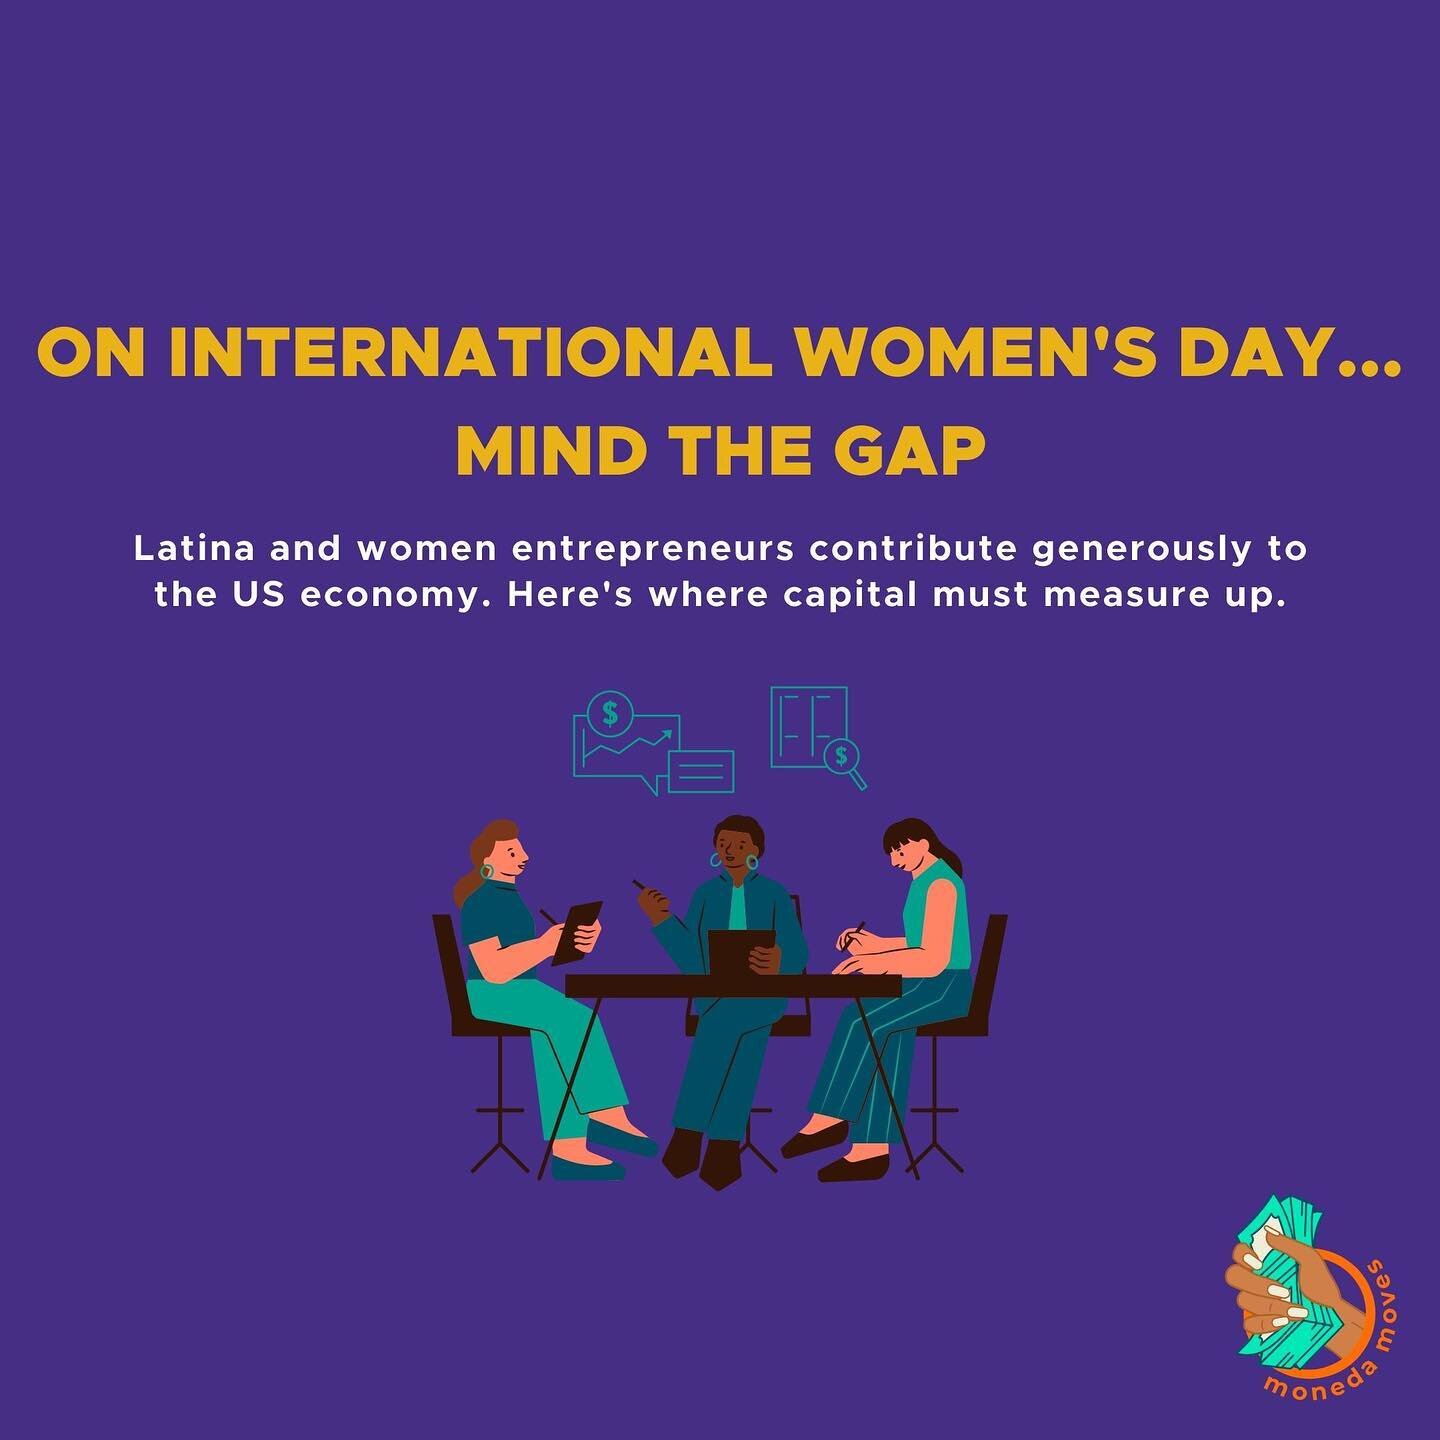 💼 On #InternationalWomensday mi gente, we remind you to MIND THE GAP. Make no mistake, Latina and women entrepreneurs contribute generously to the US economy. 

➡️ Swipe through for just a few ways we can honor women and capital can measure 🆙
.
.
.